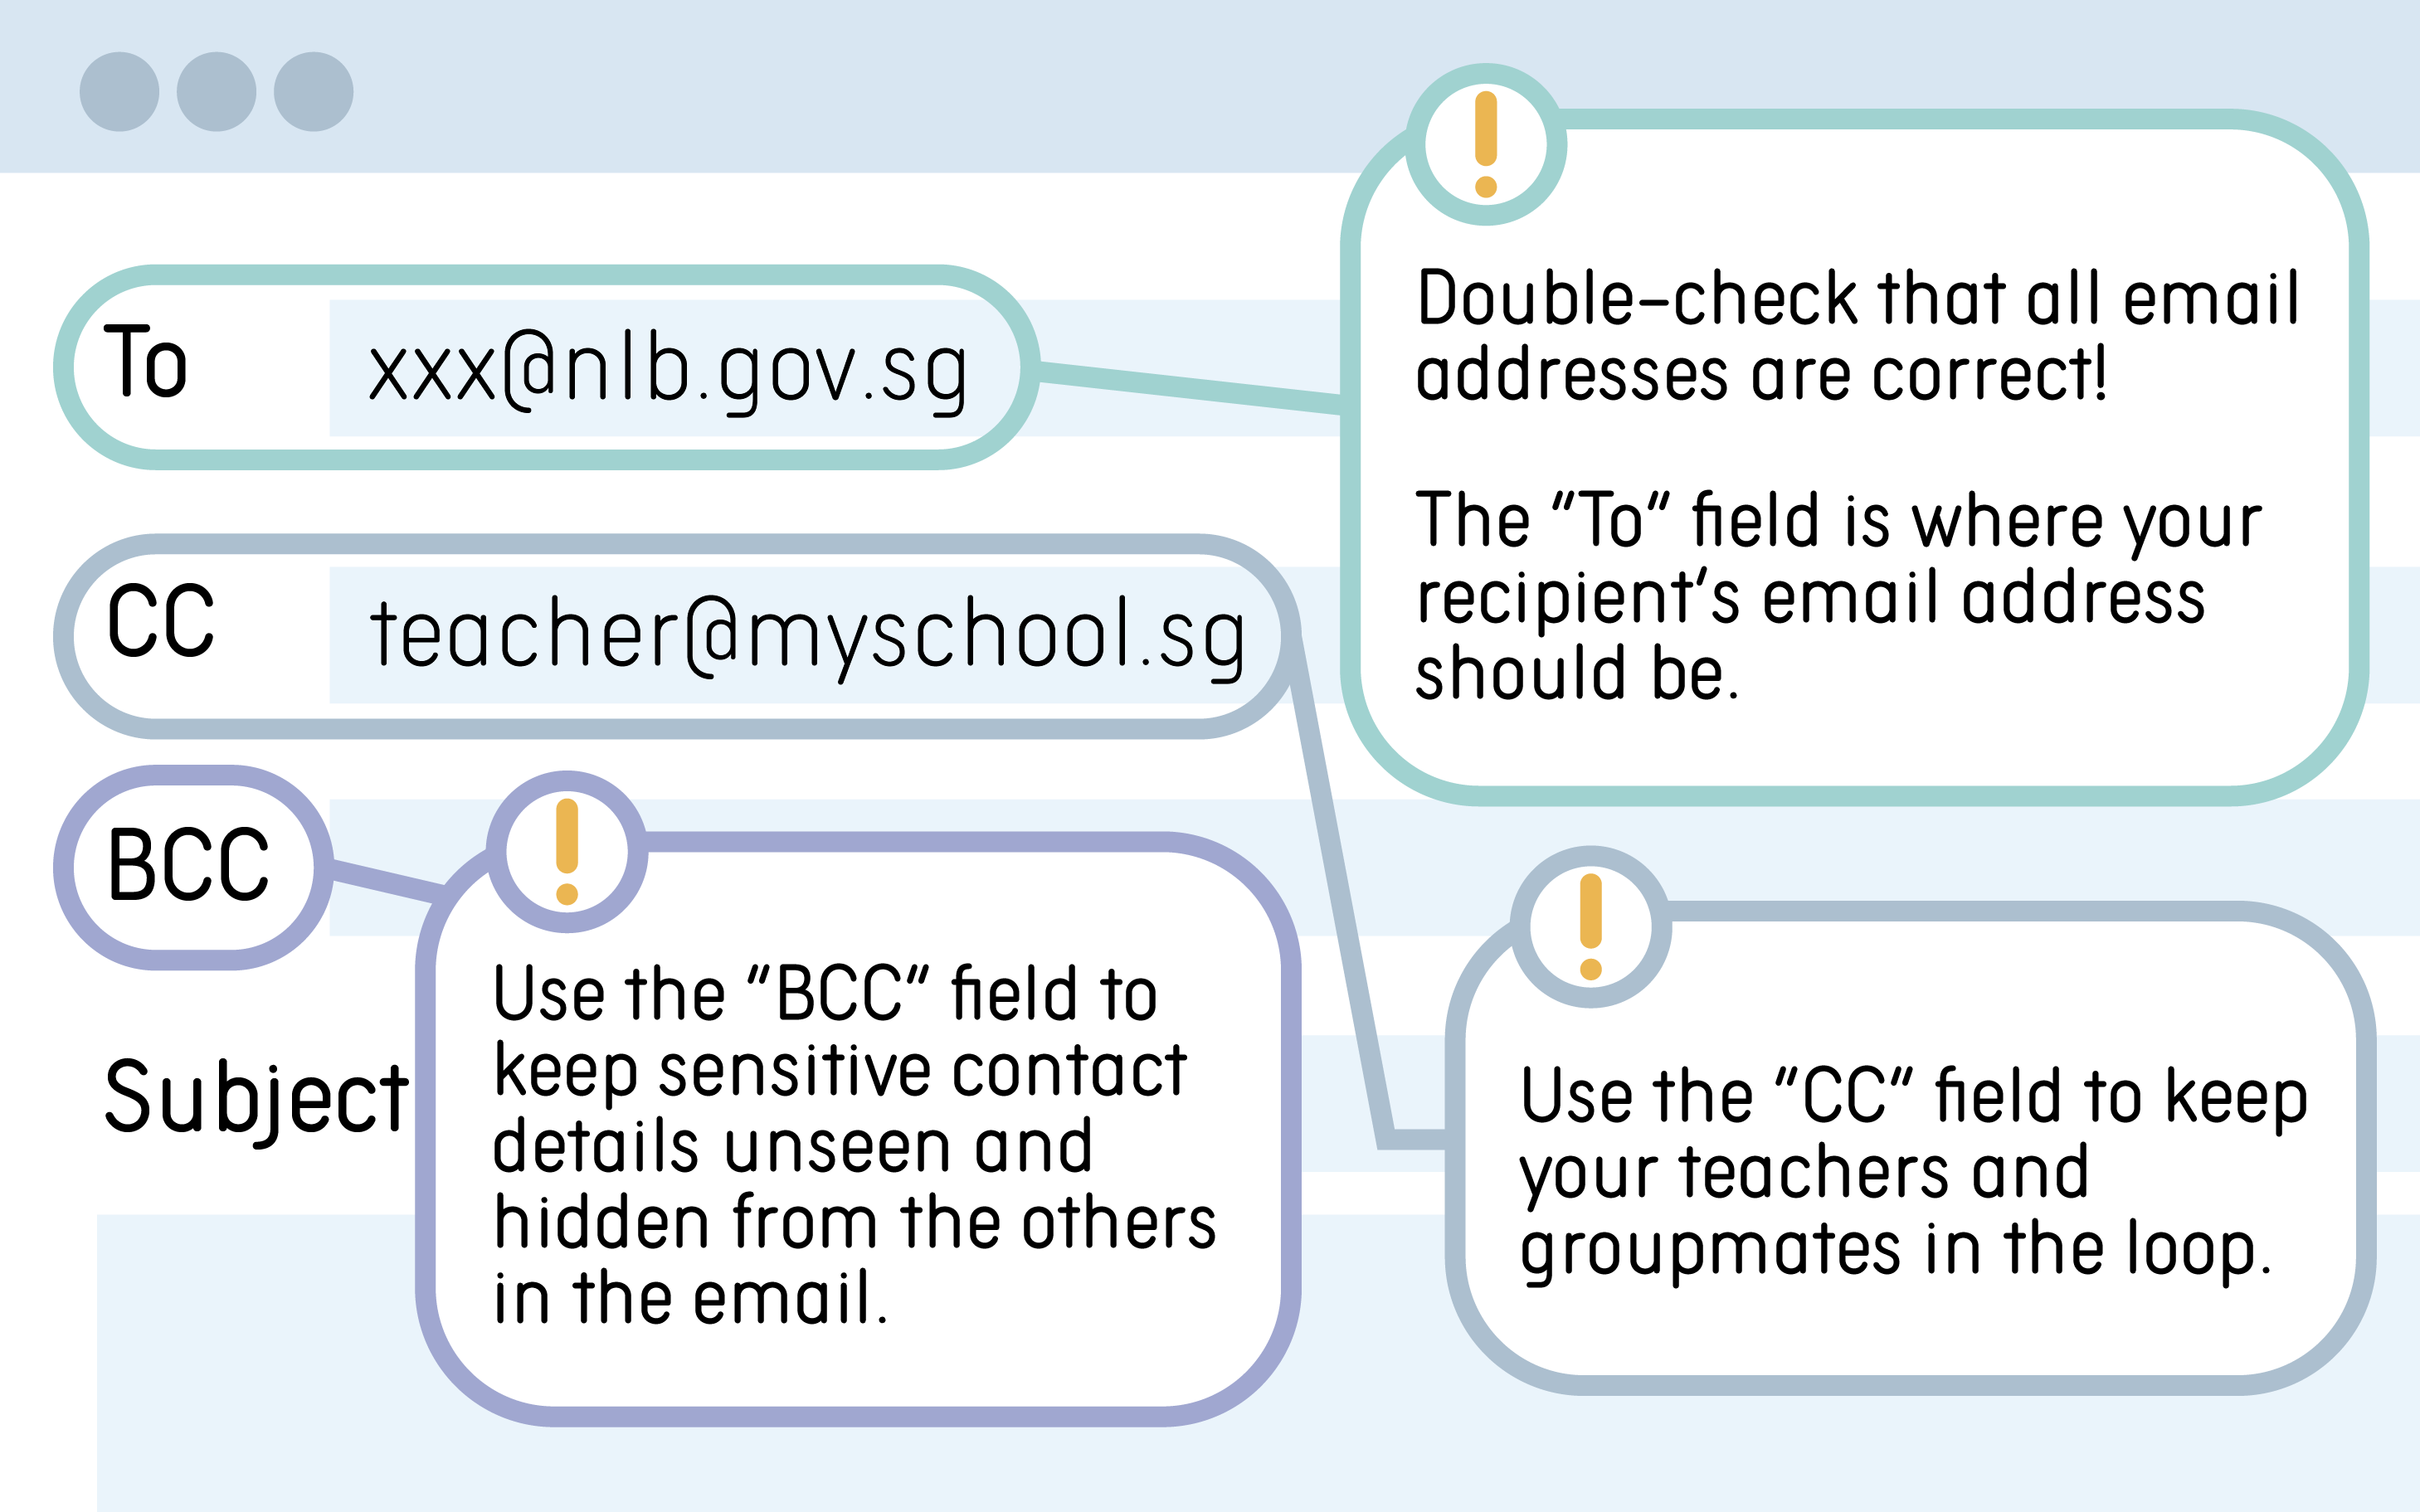 Tips: Double-check that all email addresses are correct! The To field is where your recipient’s email address should be. Use the CC field to keep your teachers and groupmates in the loop. If you have sensitive contact details that you do not wish to share with others in the email, use the “BCC” field to keep them unseen.